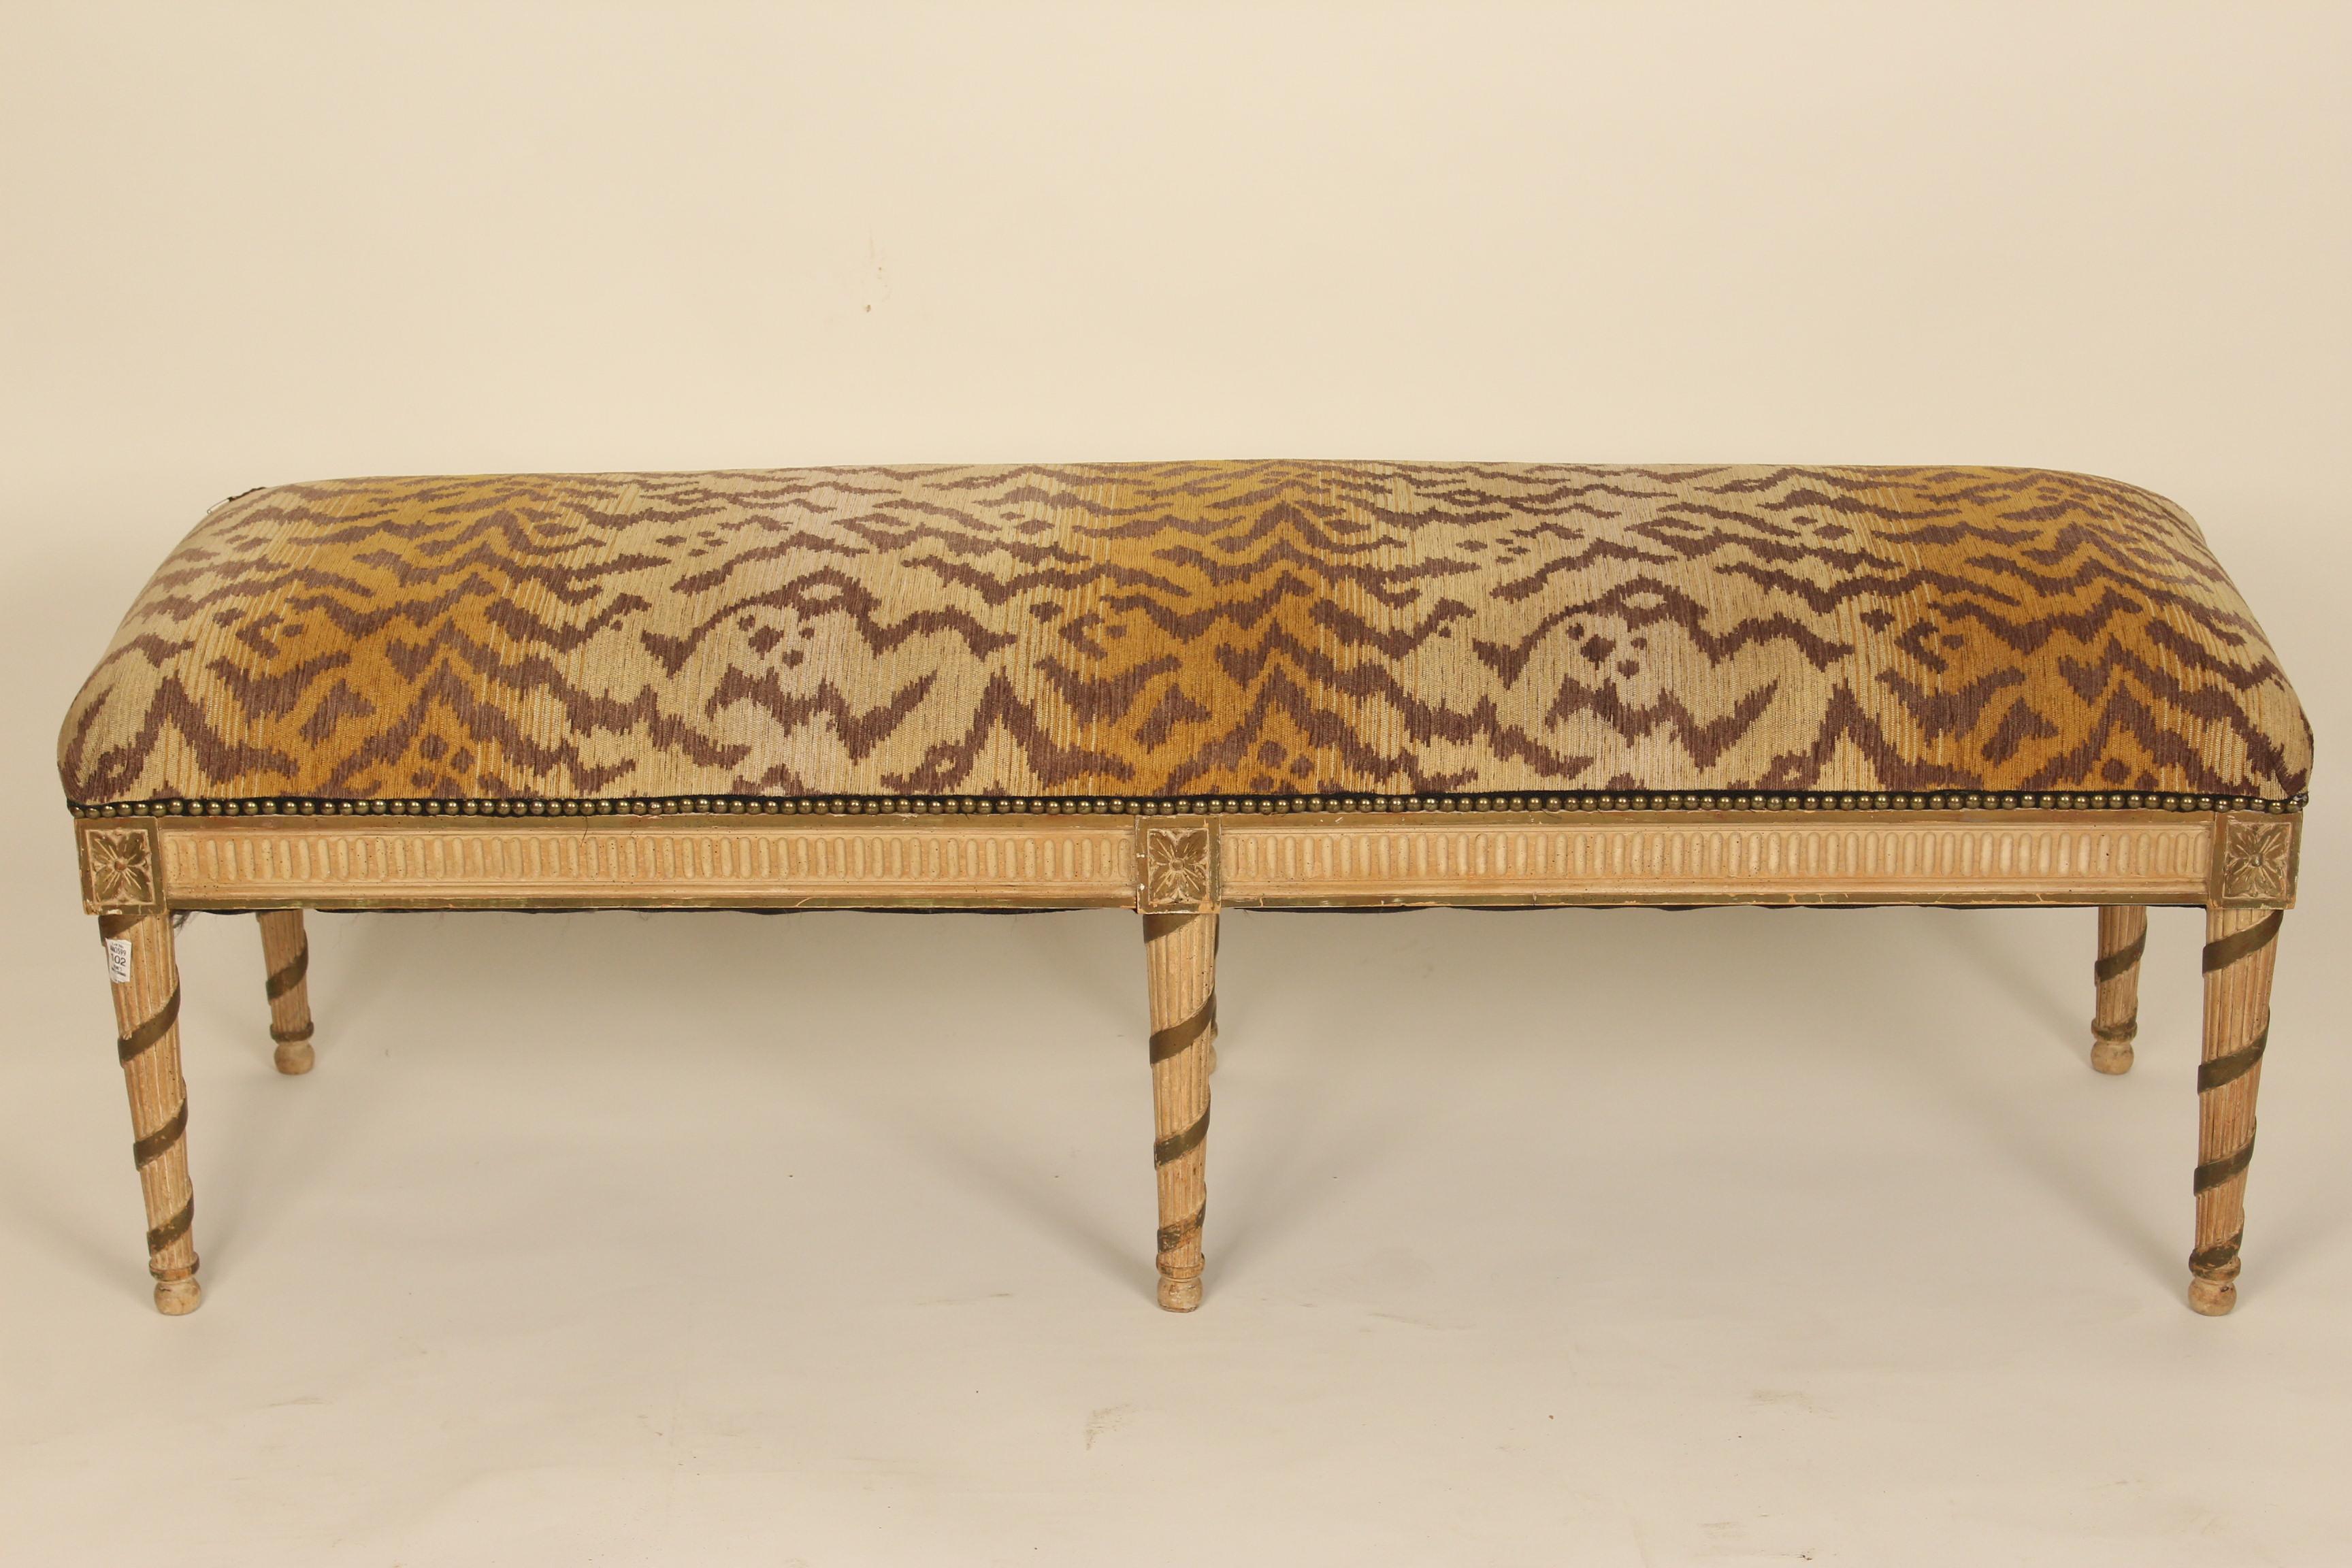 Louis XVI style painted and partial gilt bench with leopard style upholstery, circa 1970s. Very desirable 59